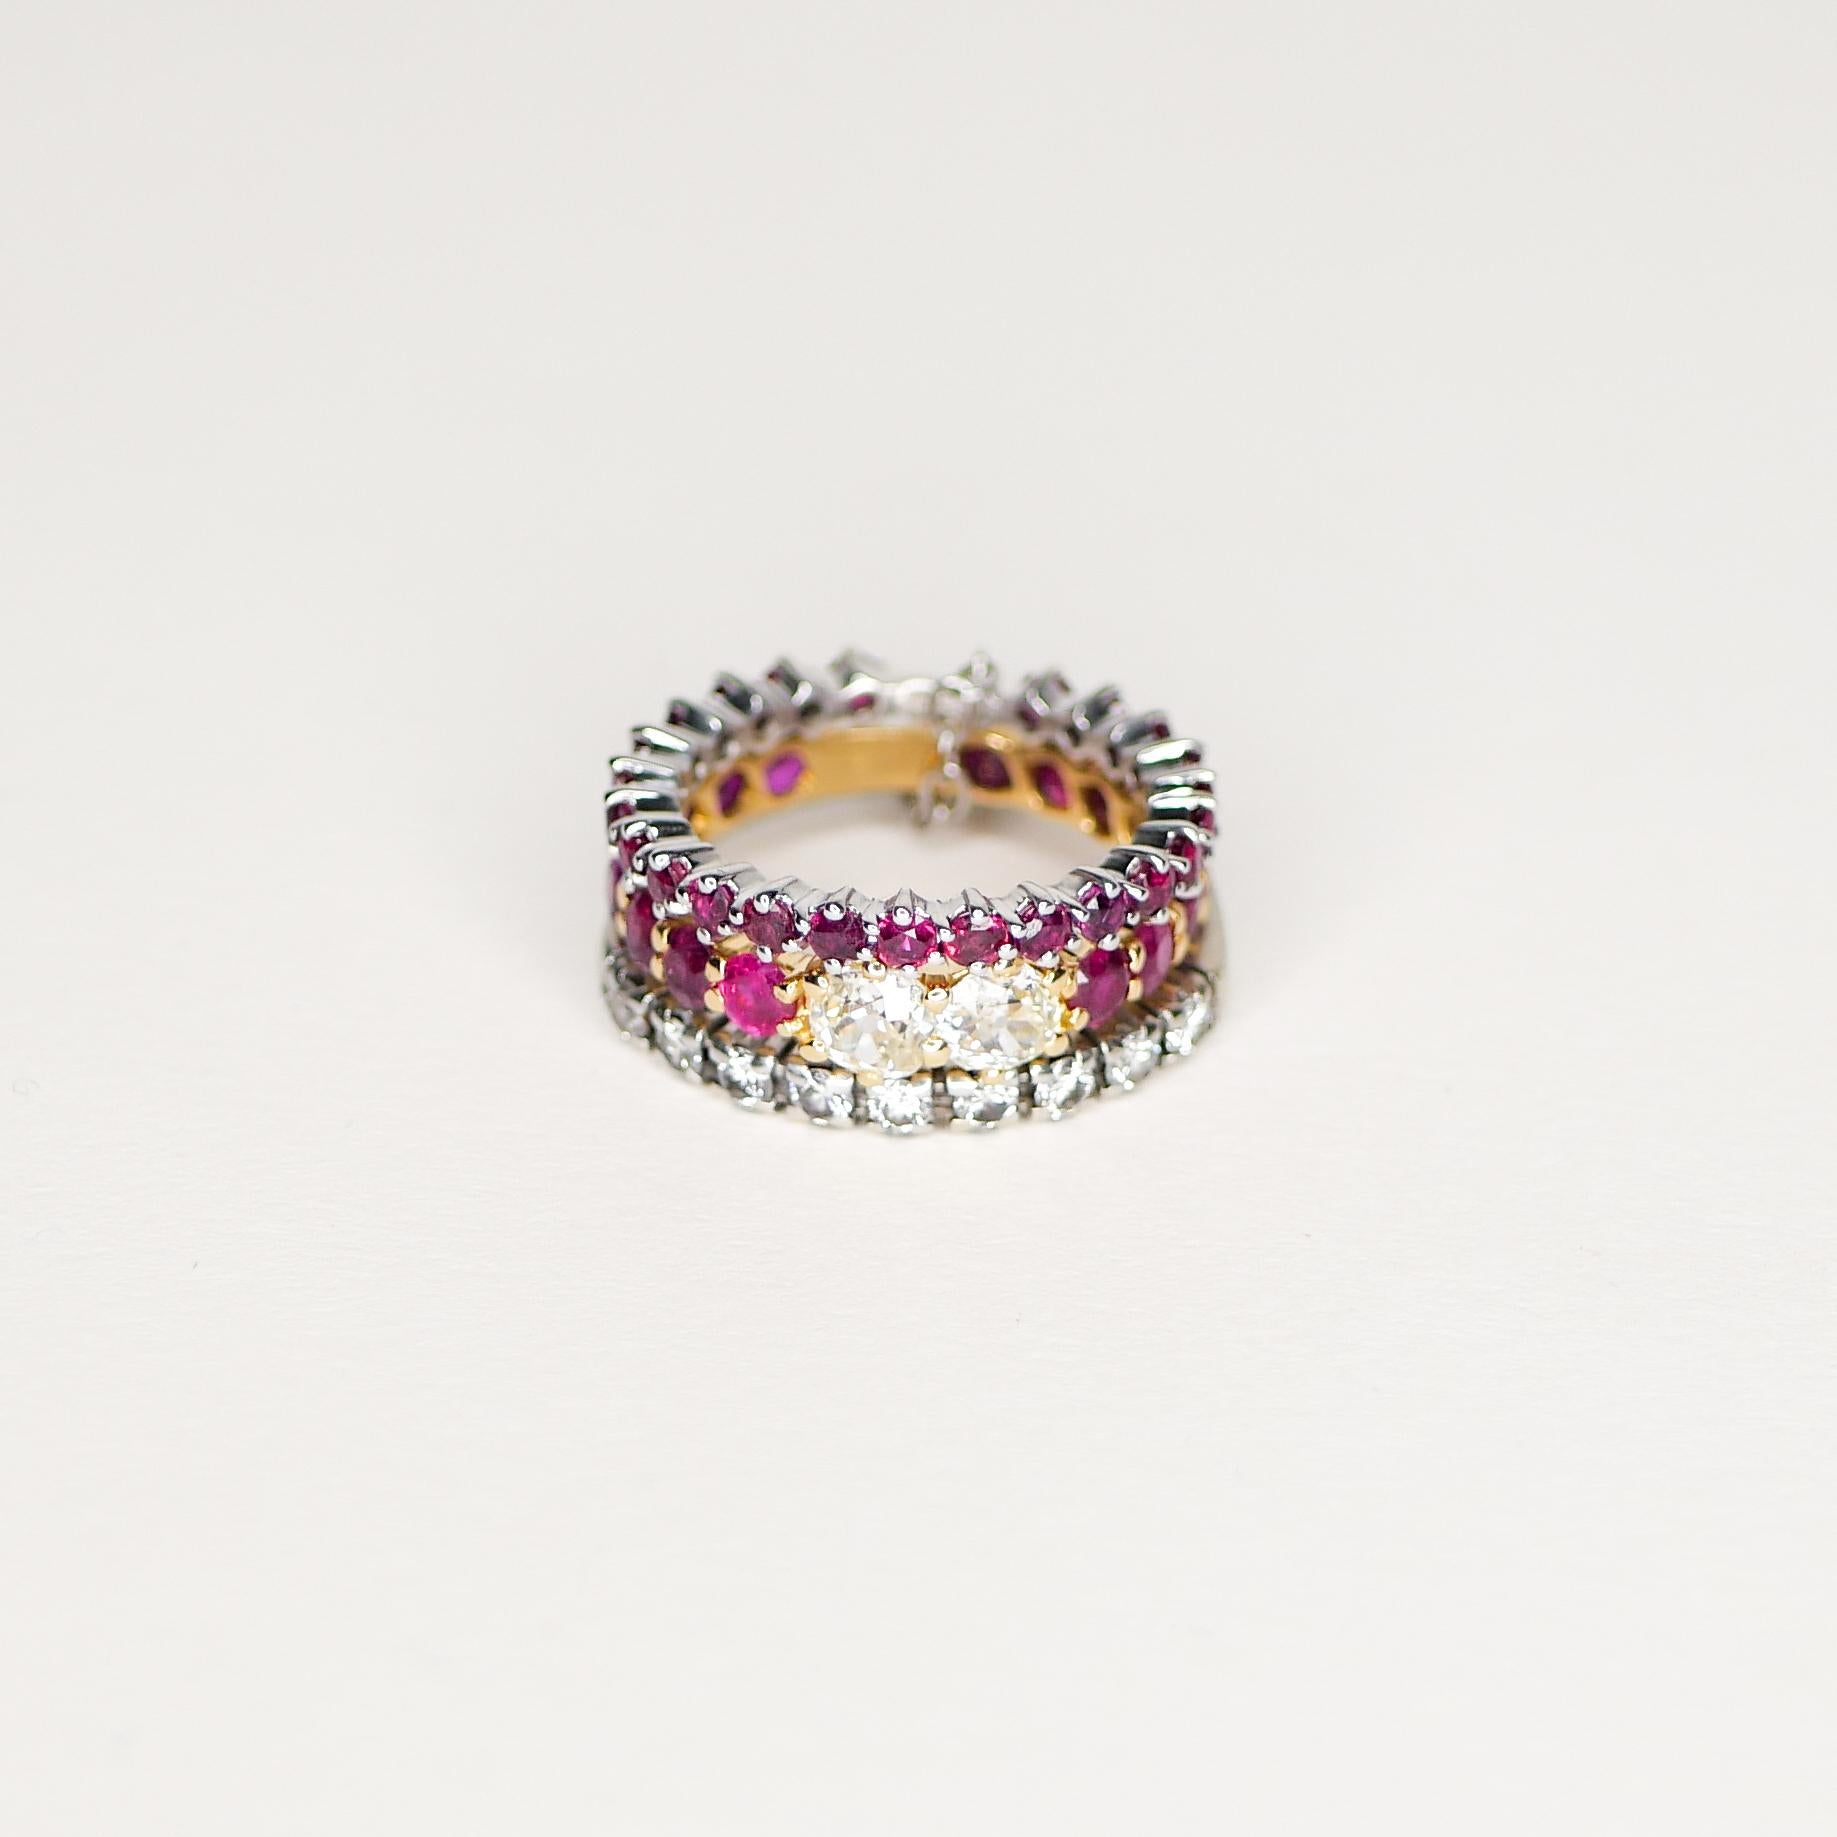 Born from the premise that jewellery, like works of art, is truly timeless, ÉDITION is a collection of upcycled vintage rings.

Each exclusive and numbered assembly, made in Paris, becomes a single jewel offering a new reading of the old.

American